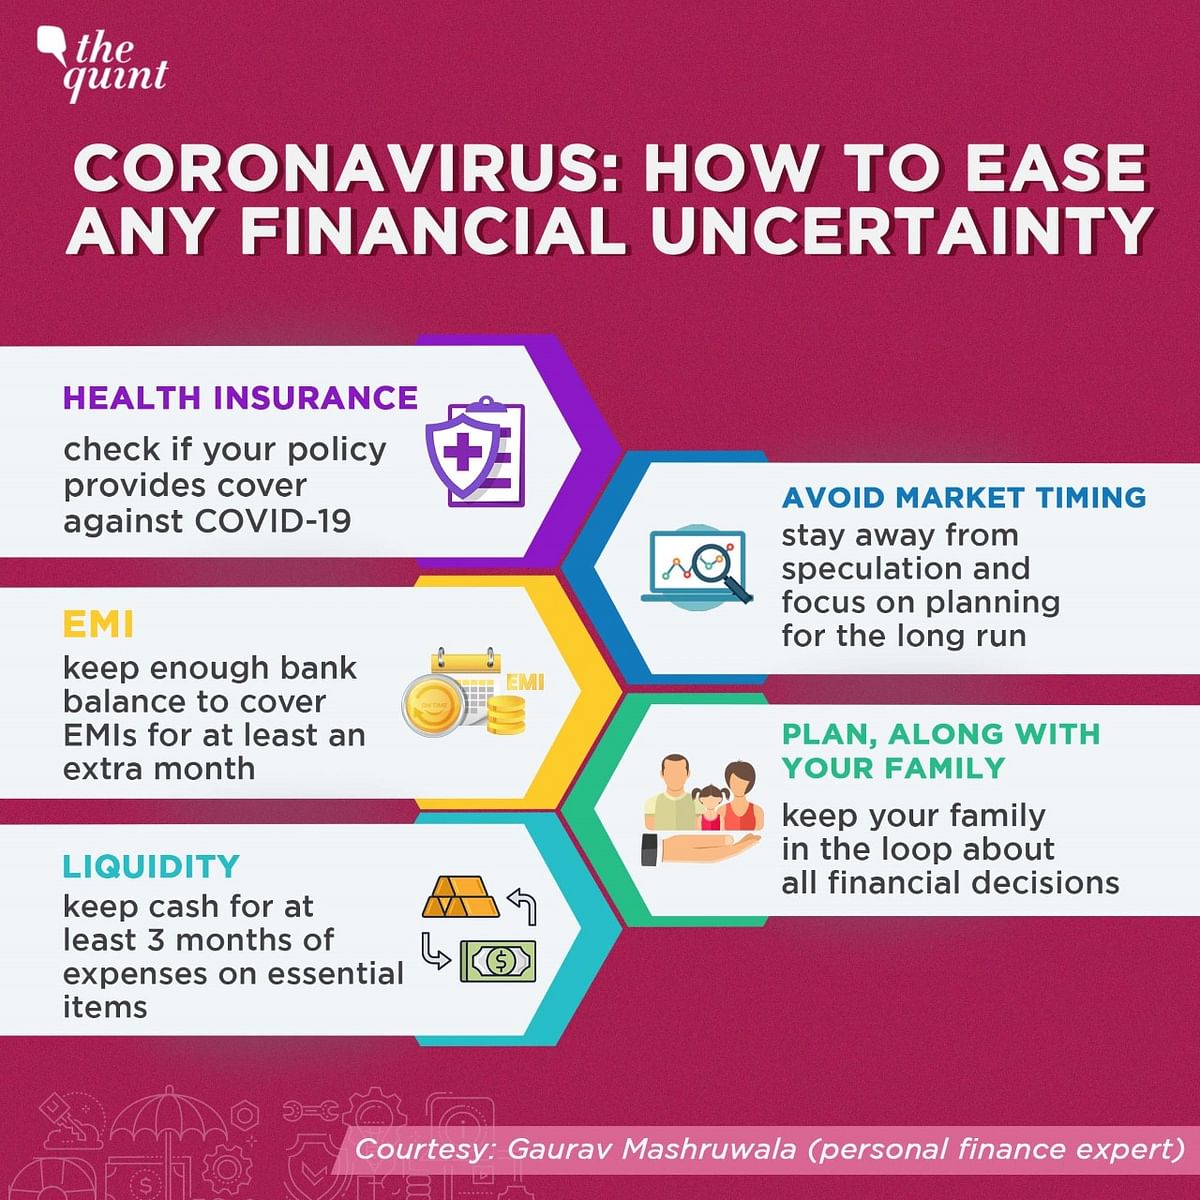 Here are some important precautionary measures to help your finances amid the coronavirus scare.